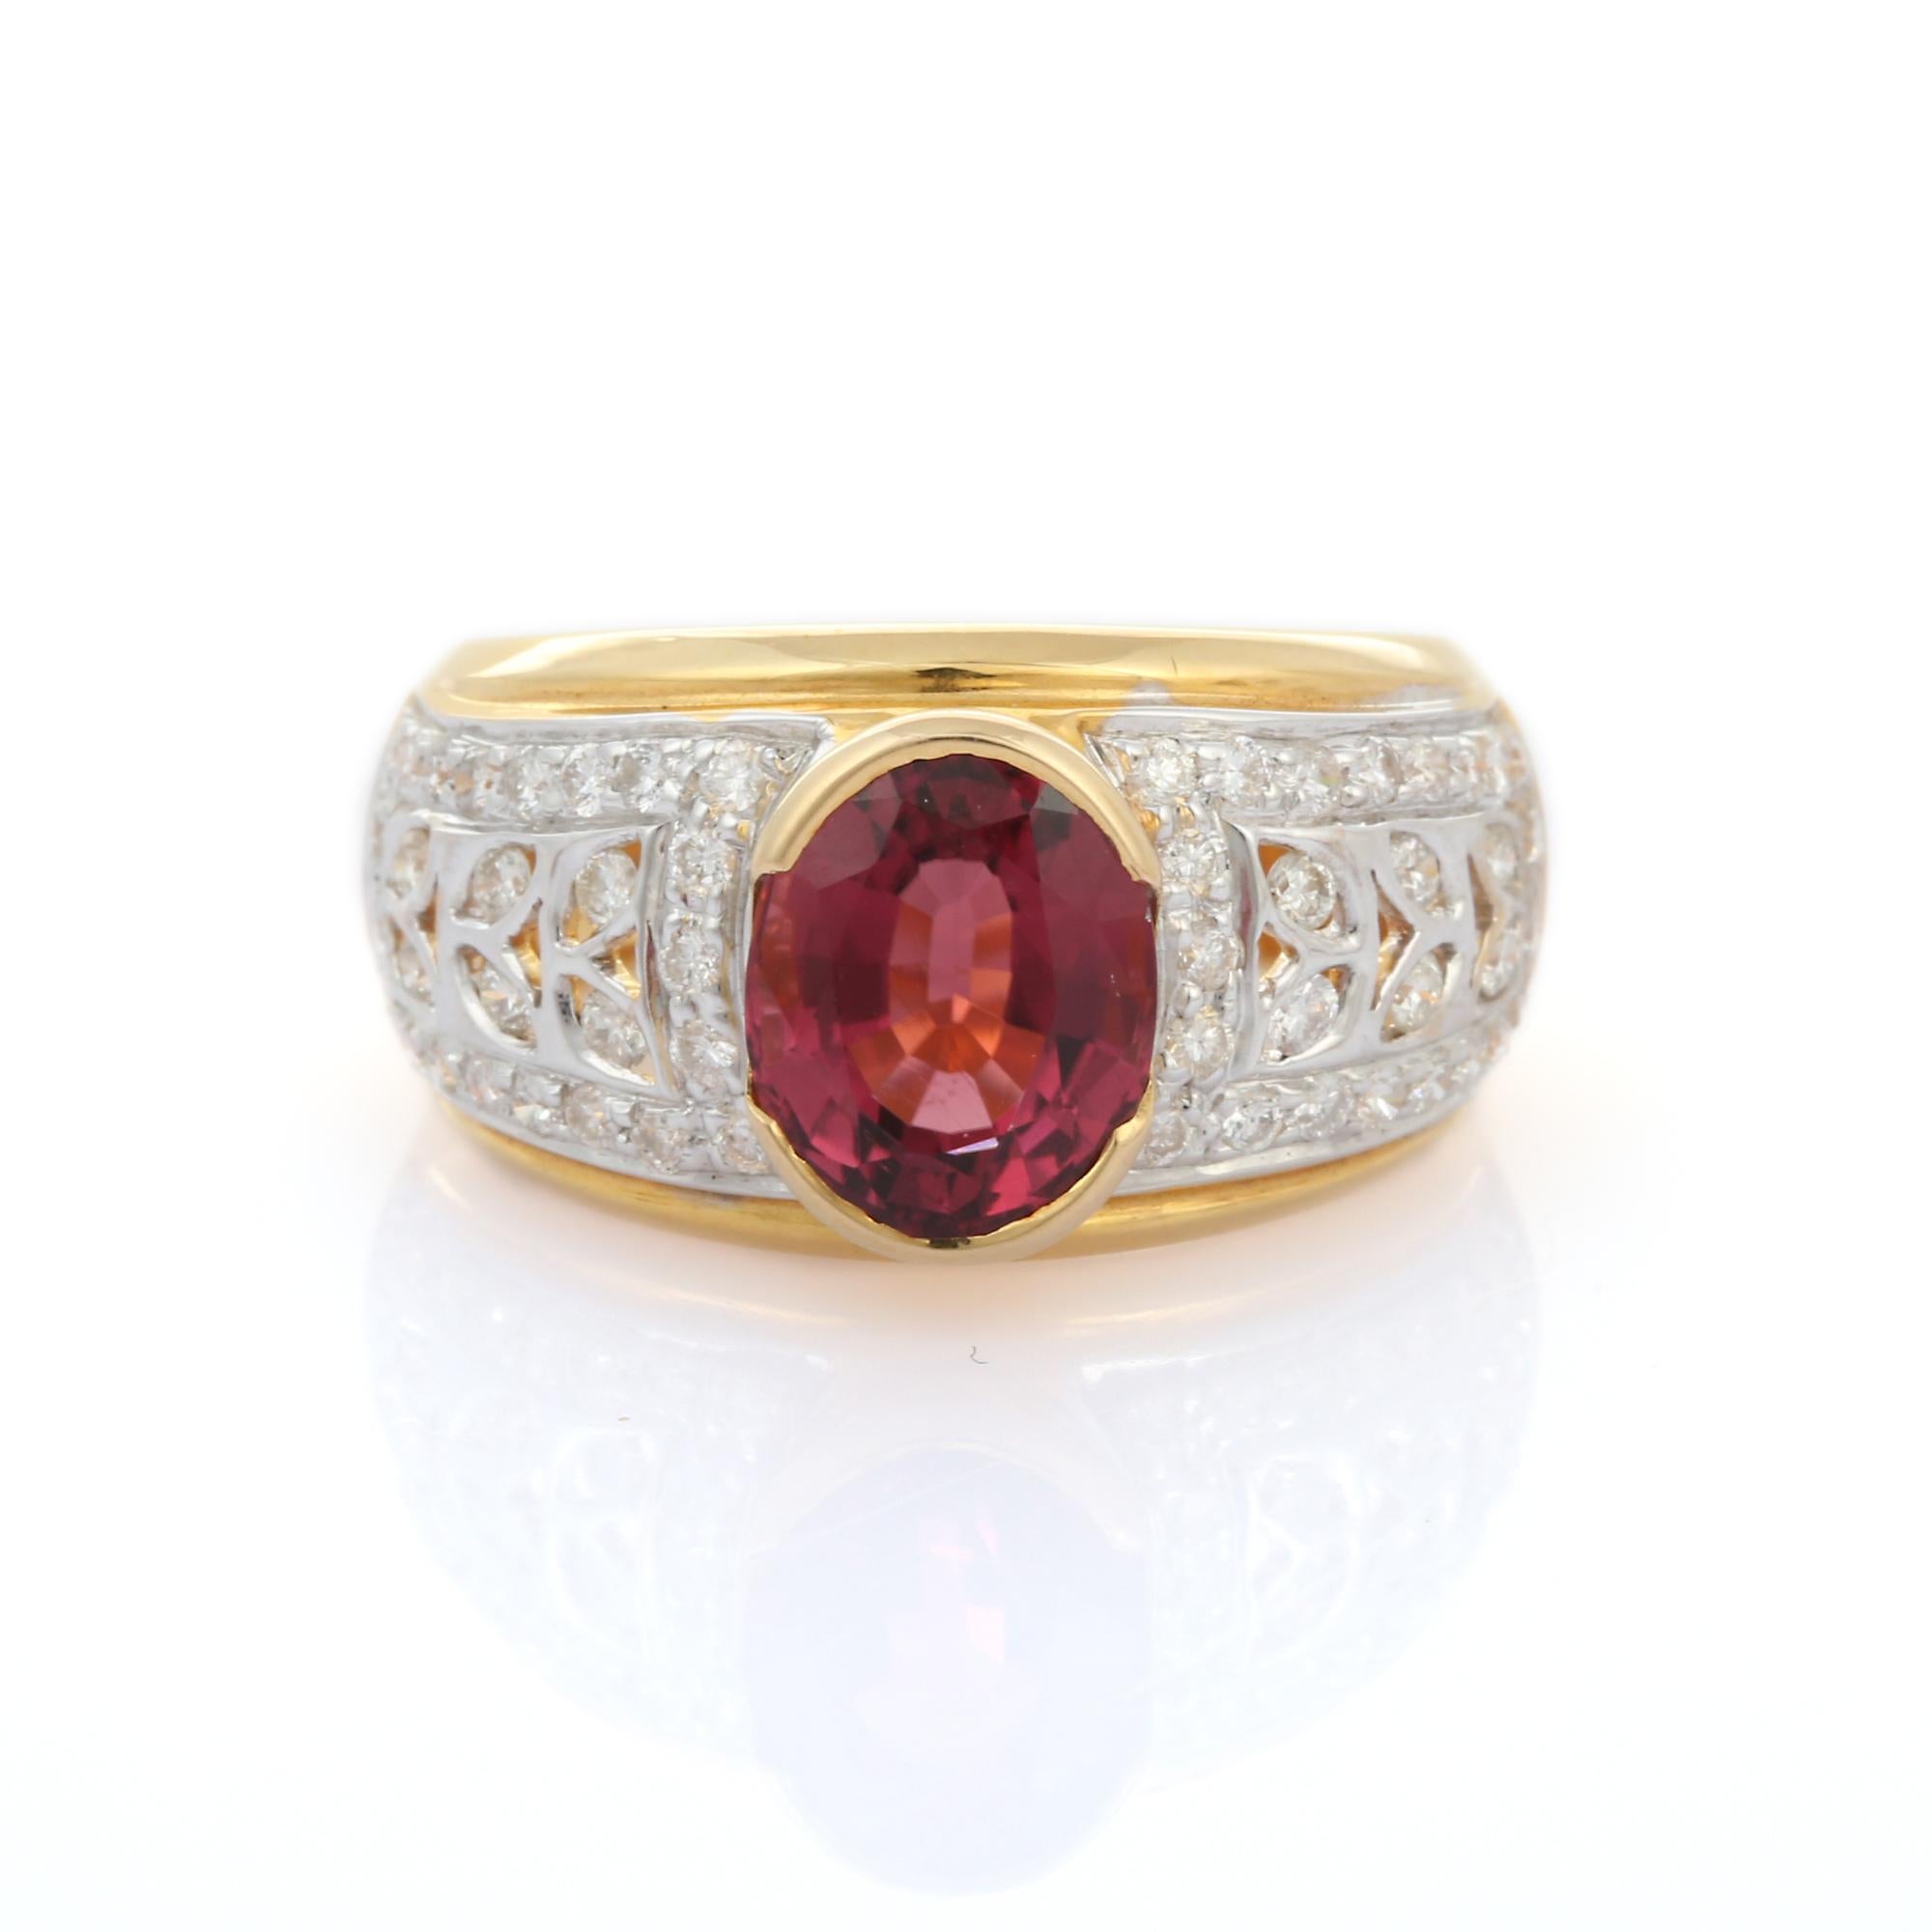 For Sale:  Vivid Oval Cut Ruby and Diamond Cocktail Ring in 18K Yellow Gold 6